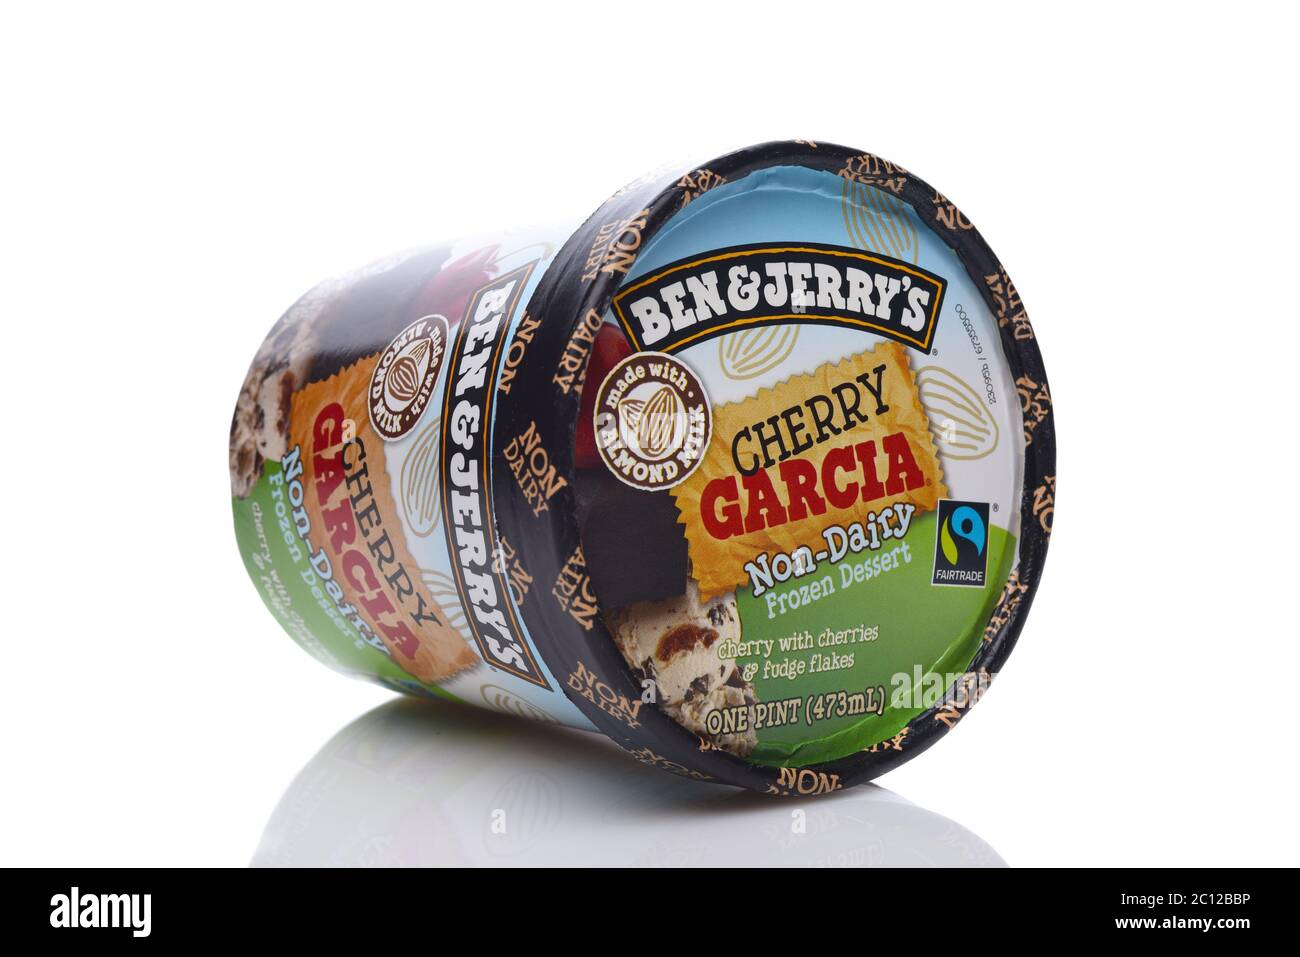 IRVINE, CALIFORNIA - 26 APRIL 2020:  A Carton of Ben and Jerrys Cherry Garcia Non-Dairy Frozen Dessert, on its side. Stock Photo